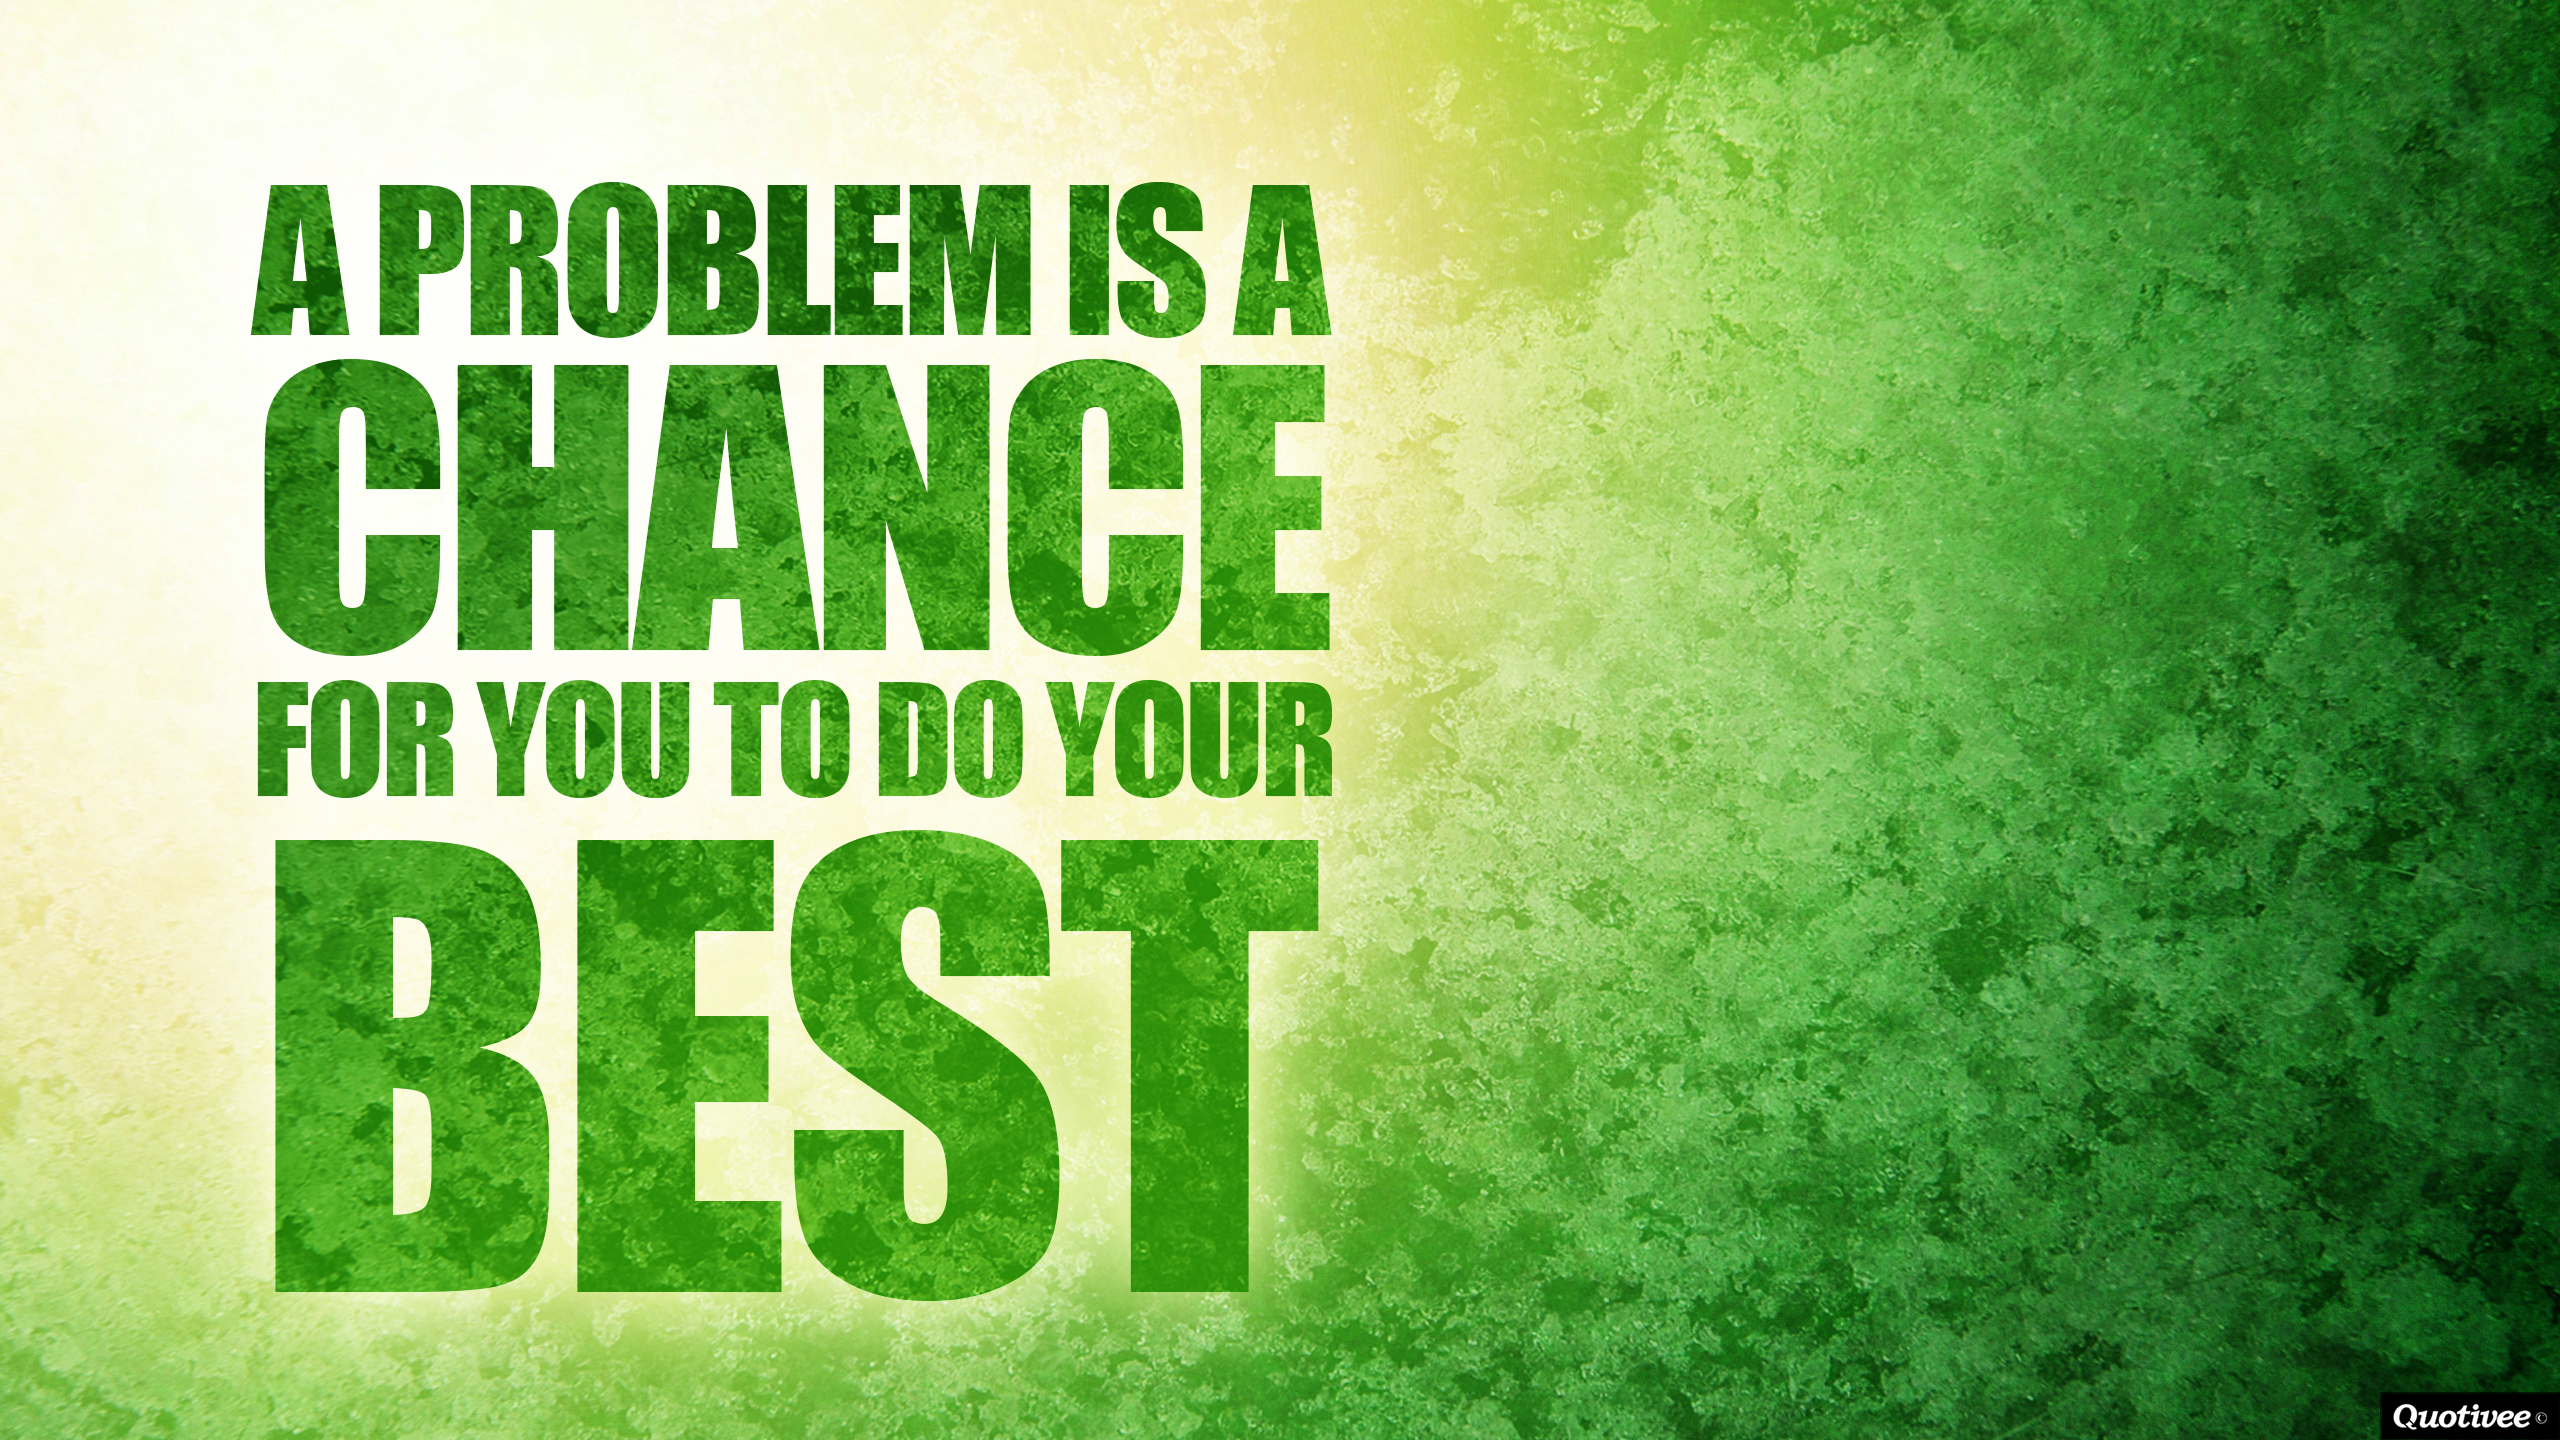 Do Your Best Quotes Wallpaper